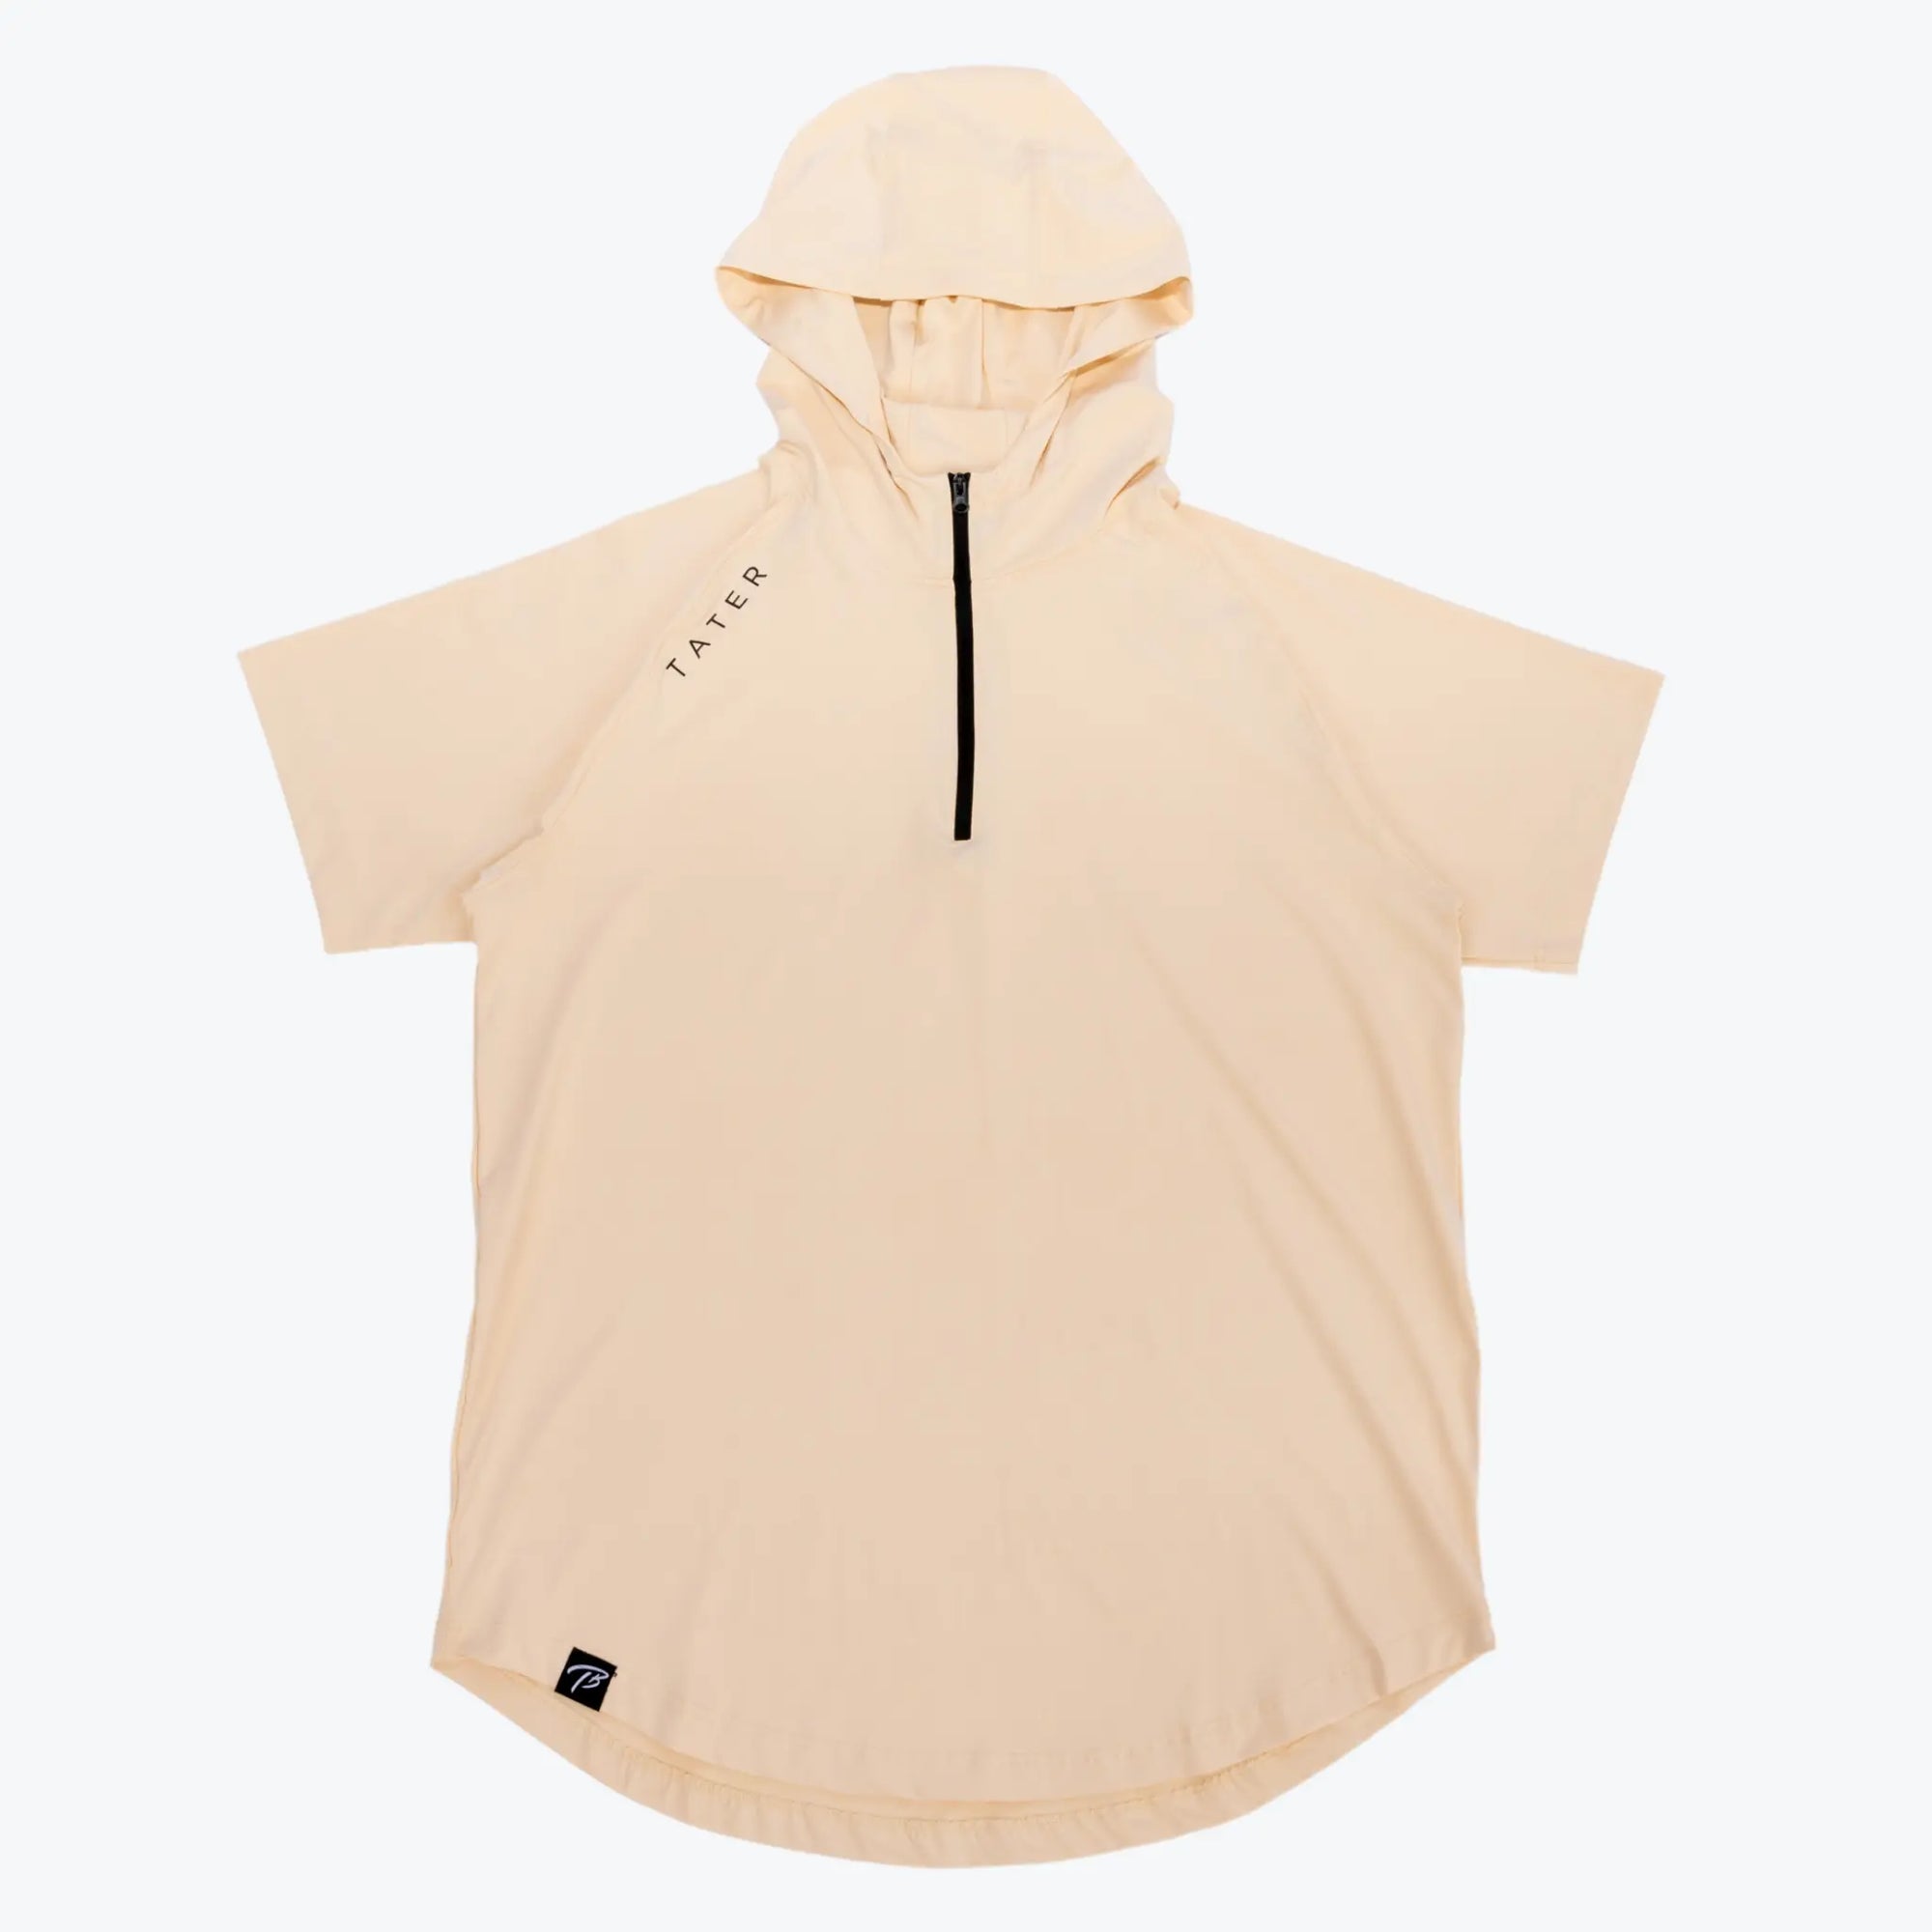 Picture of a short sleeve quarter zip baseball batting practice hoodie that has mosture wicking fabric and is tan color. The hoodie is placed on a white backdrop.